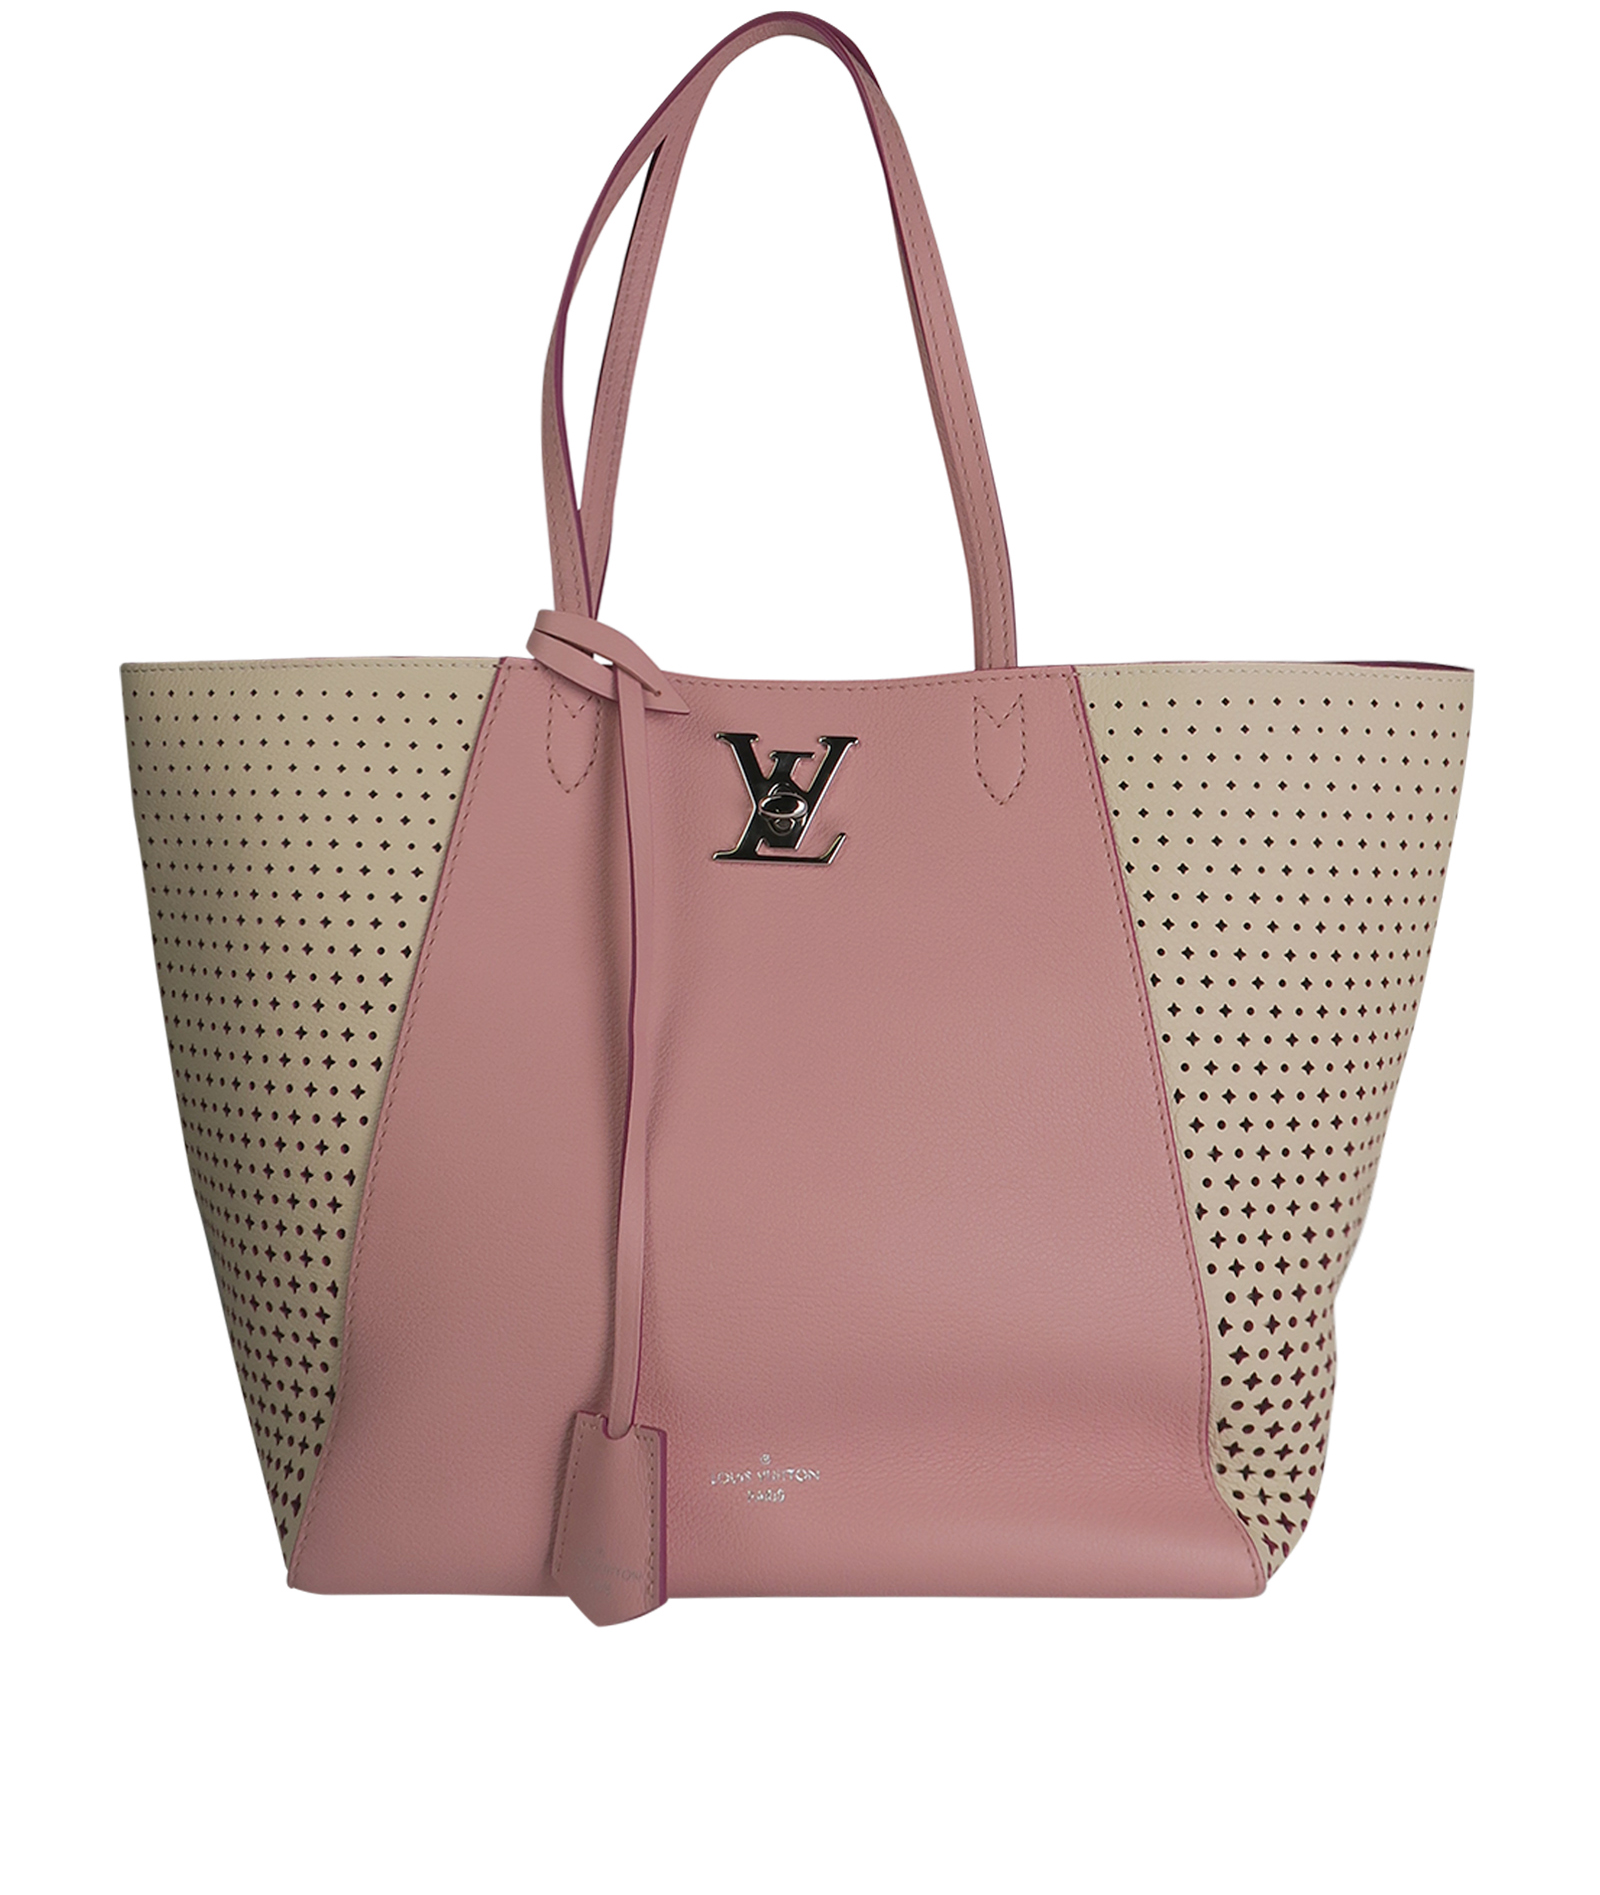 Louis Vuitton Pink Perforated Leather Monogram Flower Lockme Cabas